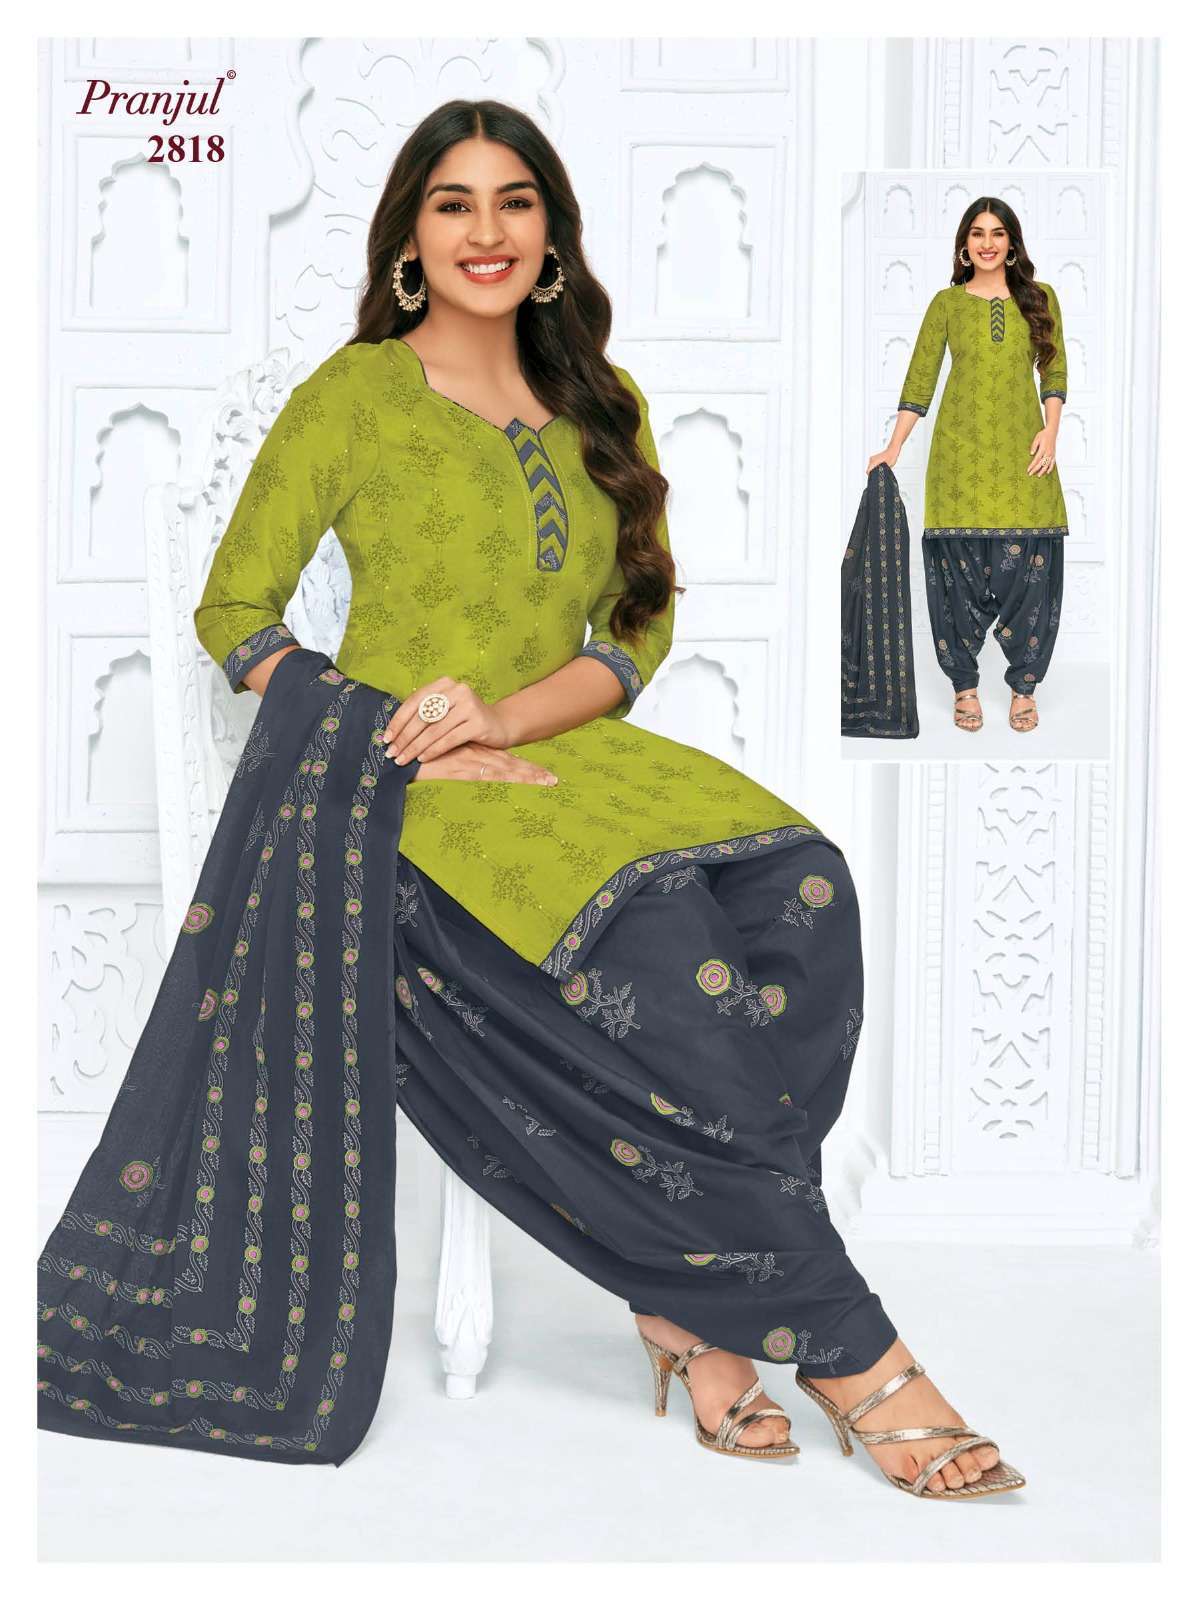 Buy Libas Pranjul Cotton Dress Material 426 Unstiched at Amazon.in